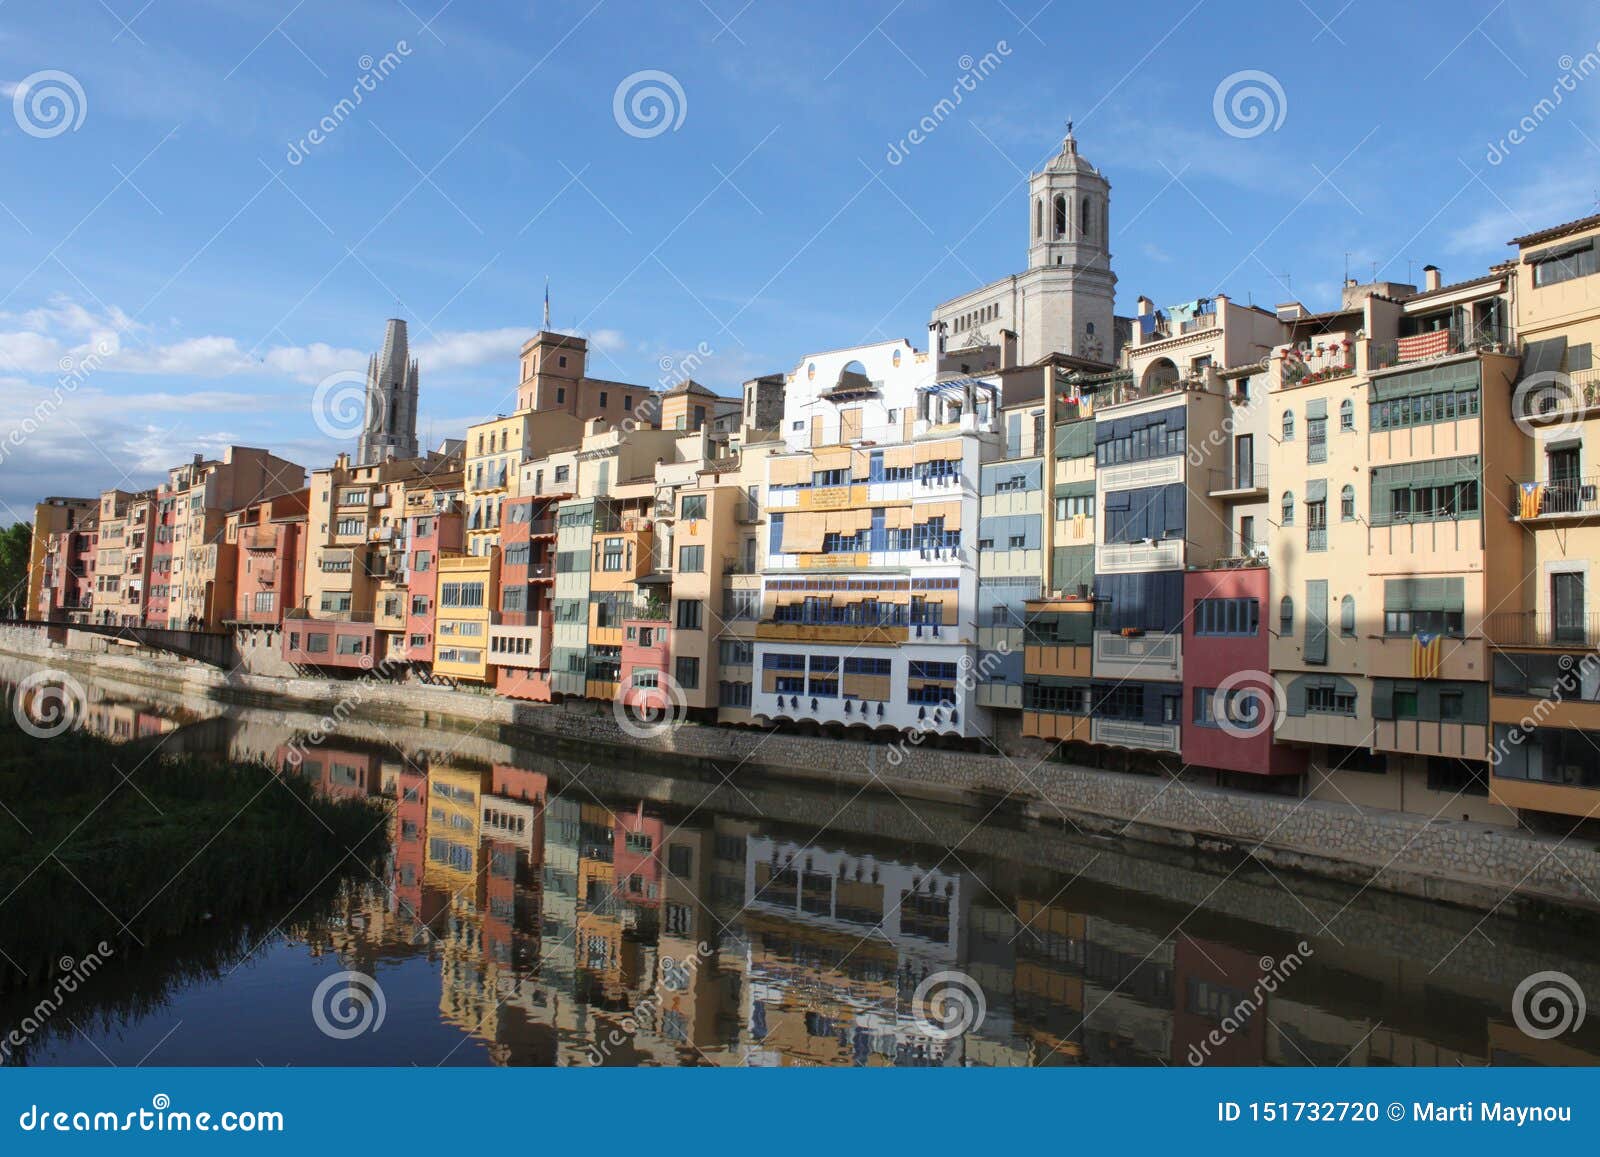 onyar river crossing girona with its typical colored houses